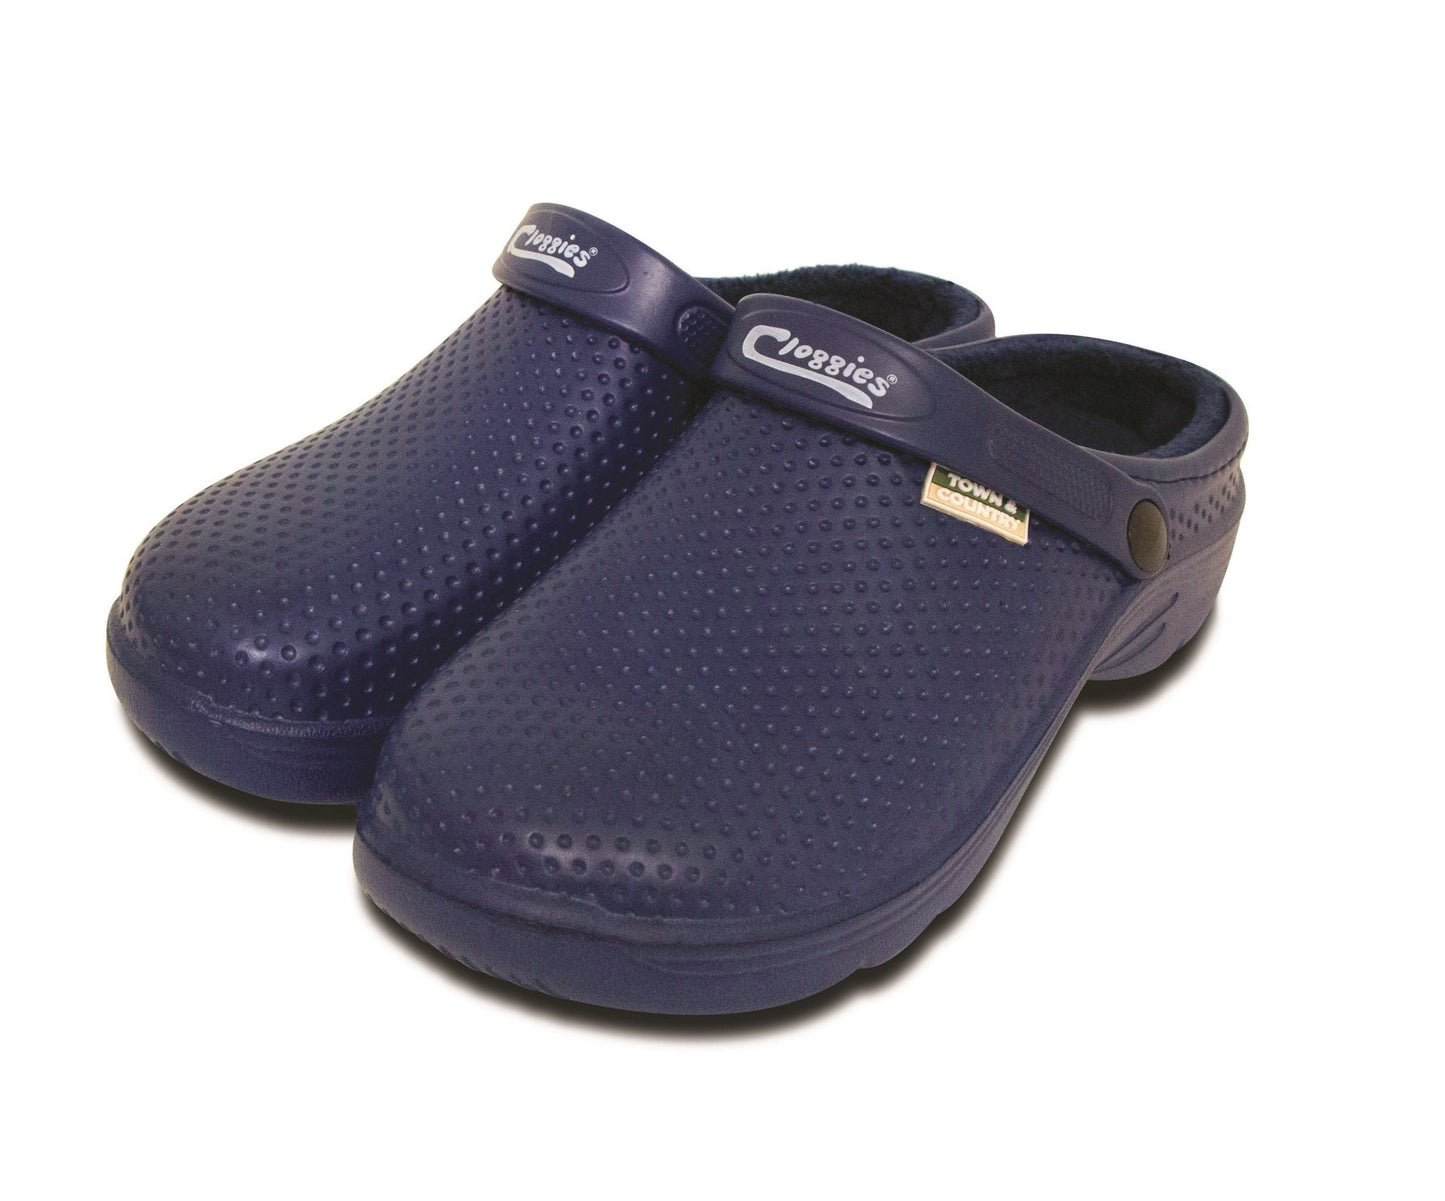 navy fleecy clogs/cloggies from town & country